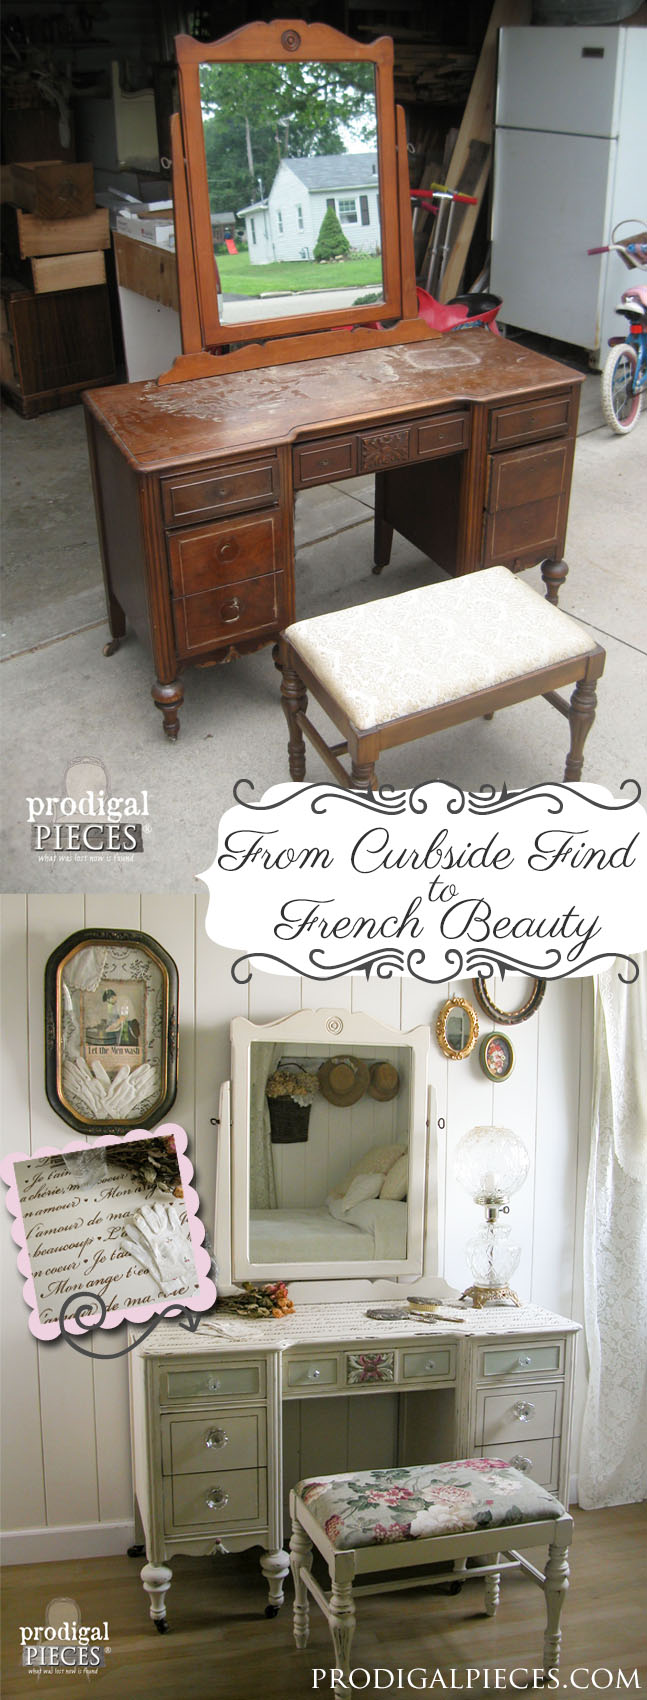 Curbside Vanity is Renewed with Fresh Look and French Script Stenci by Prodigal Pieces | prodigalpieces.com